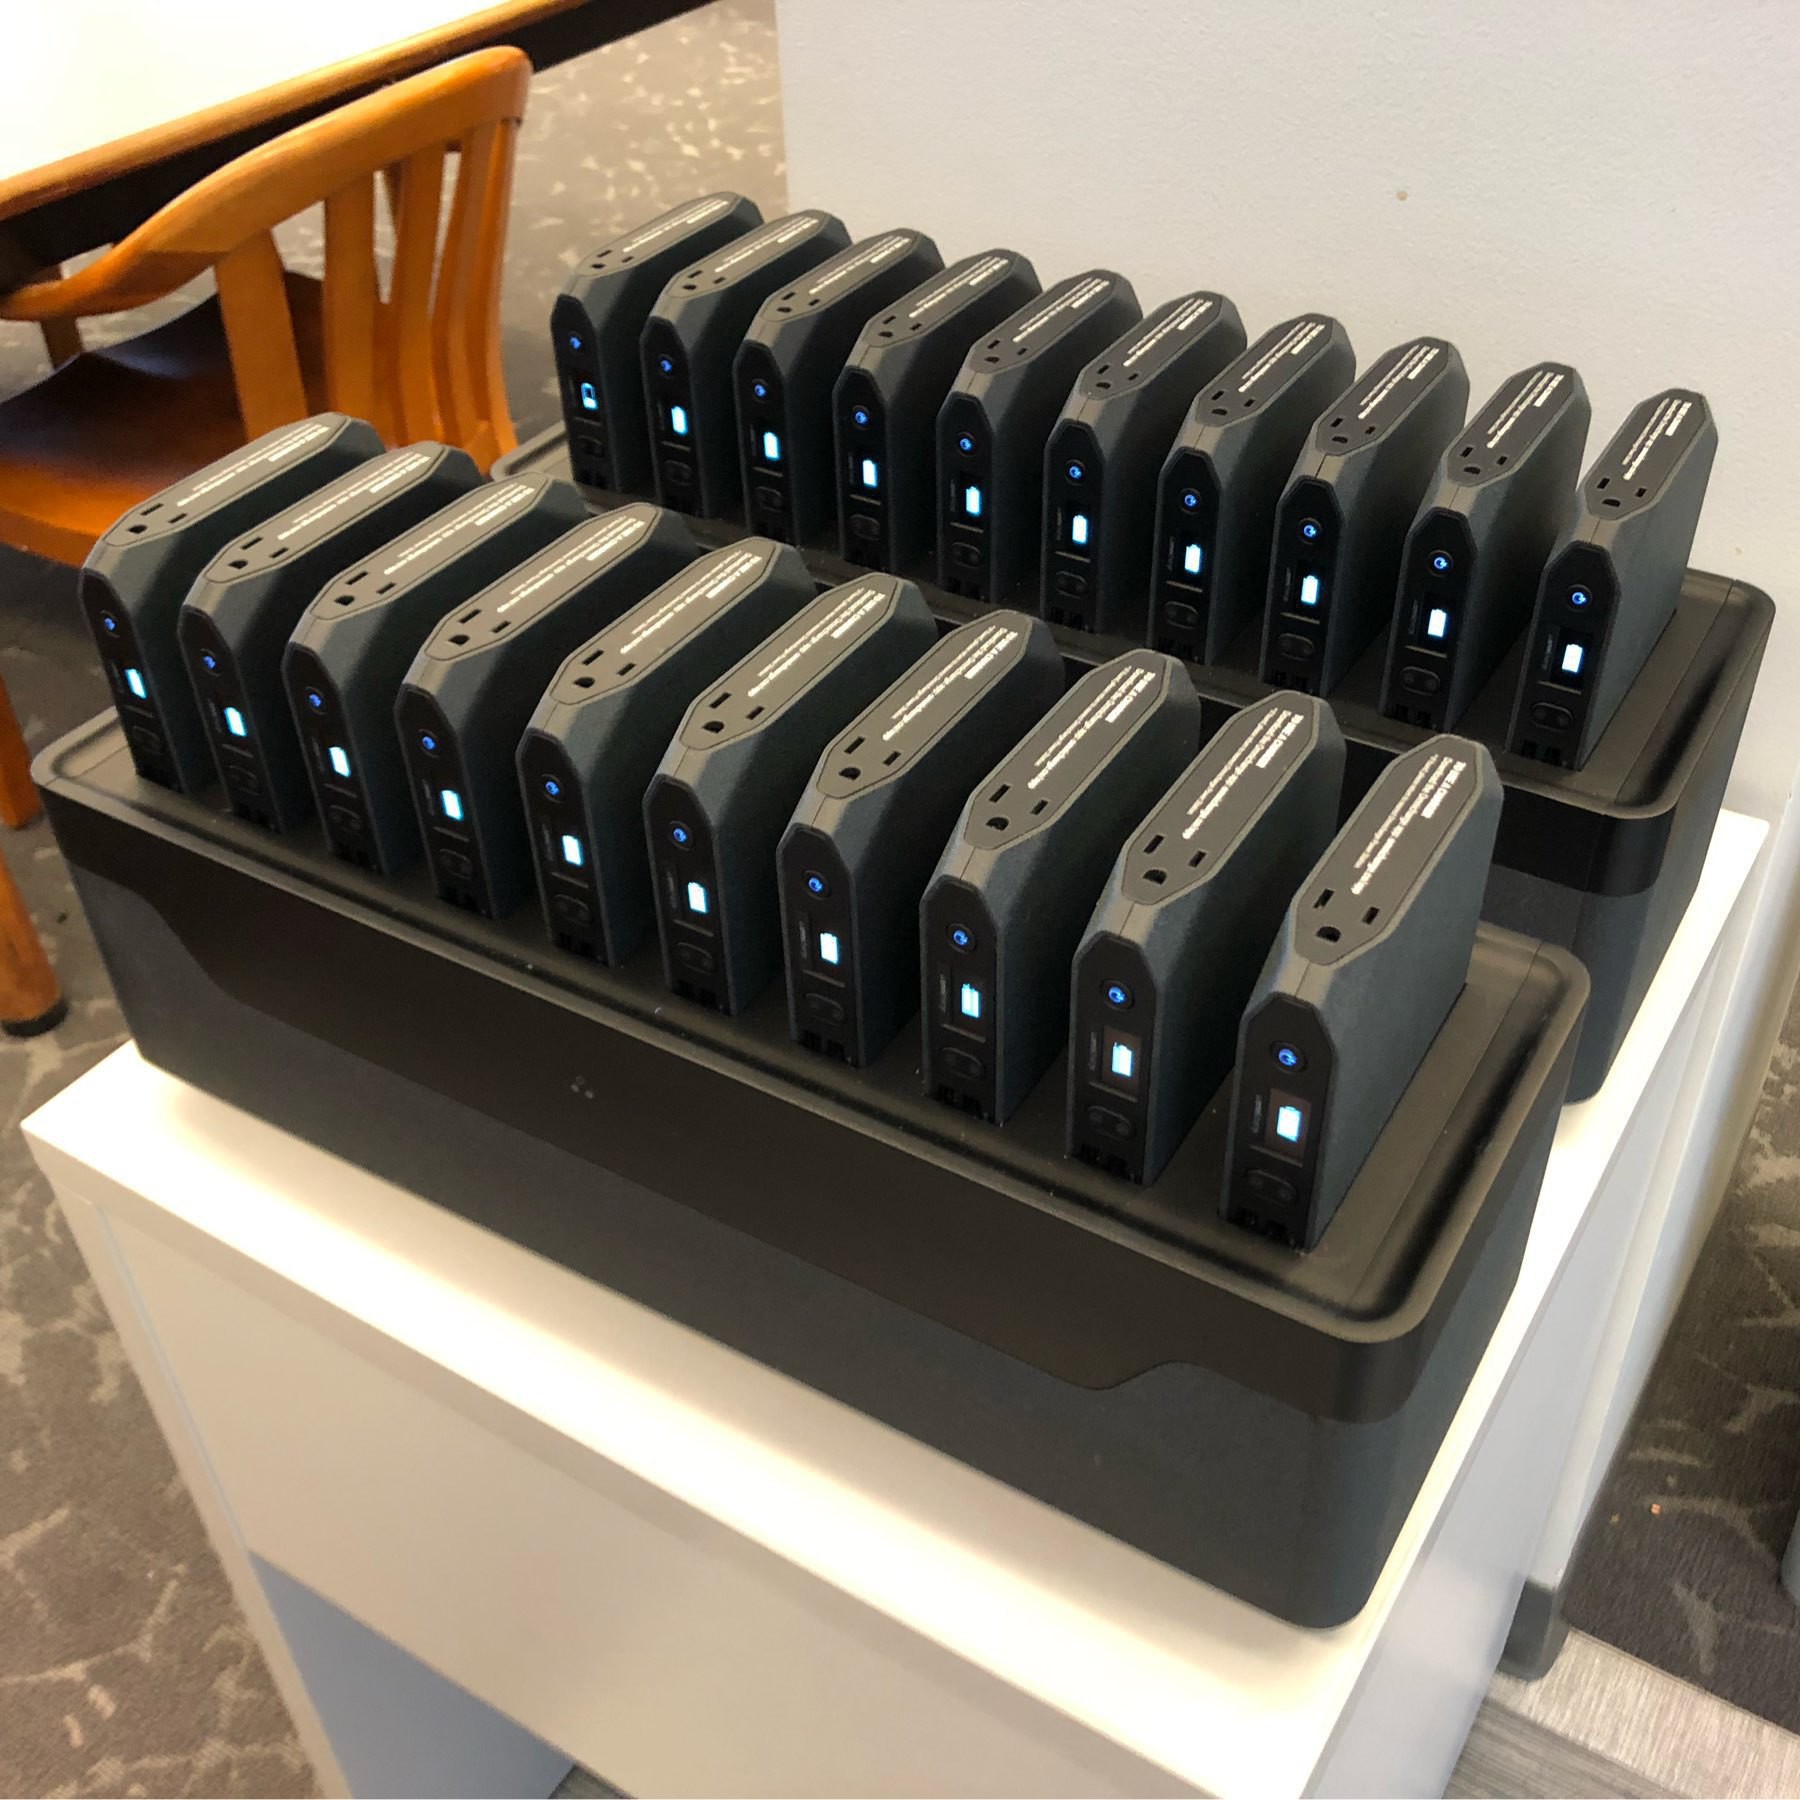 Two rows of black portable laptop chargers with white lights on them. 